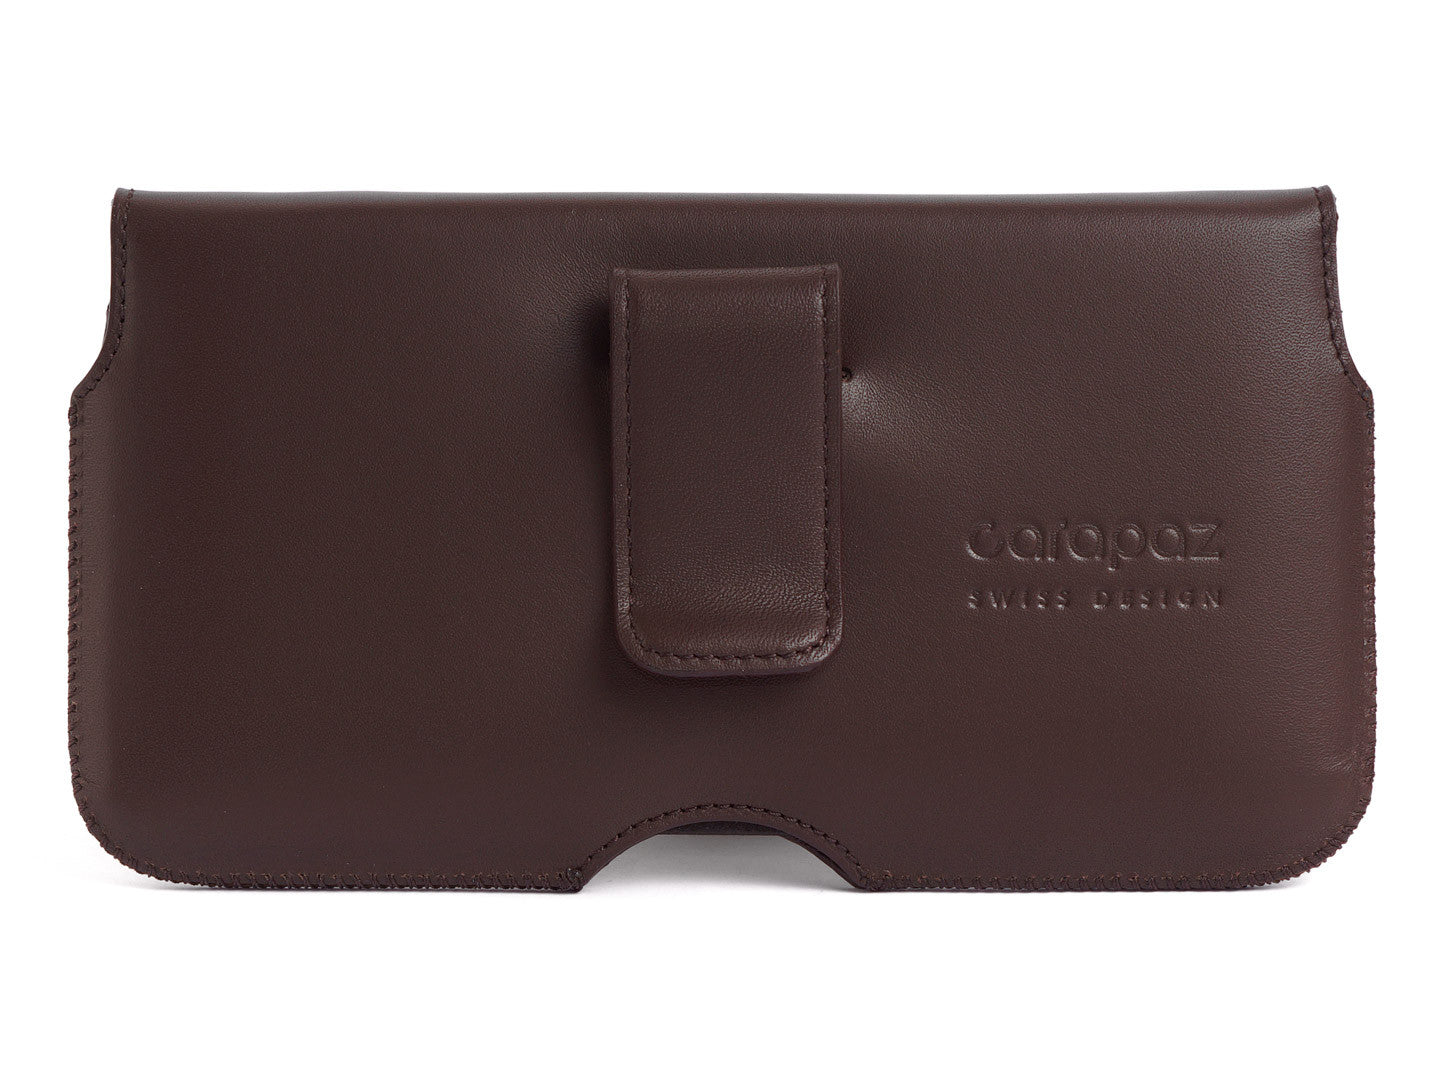 iPhone 6 Plus Leather Belt Case brown - MONTE CARLO - Carapaz